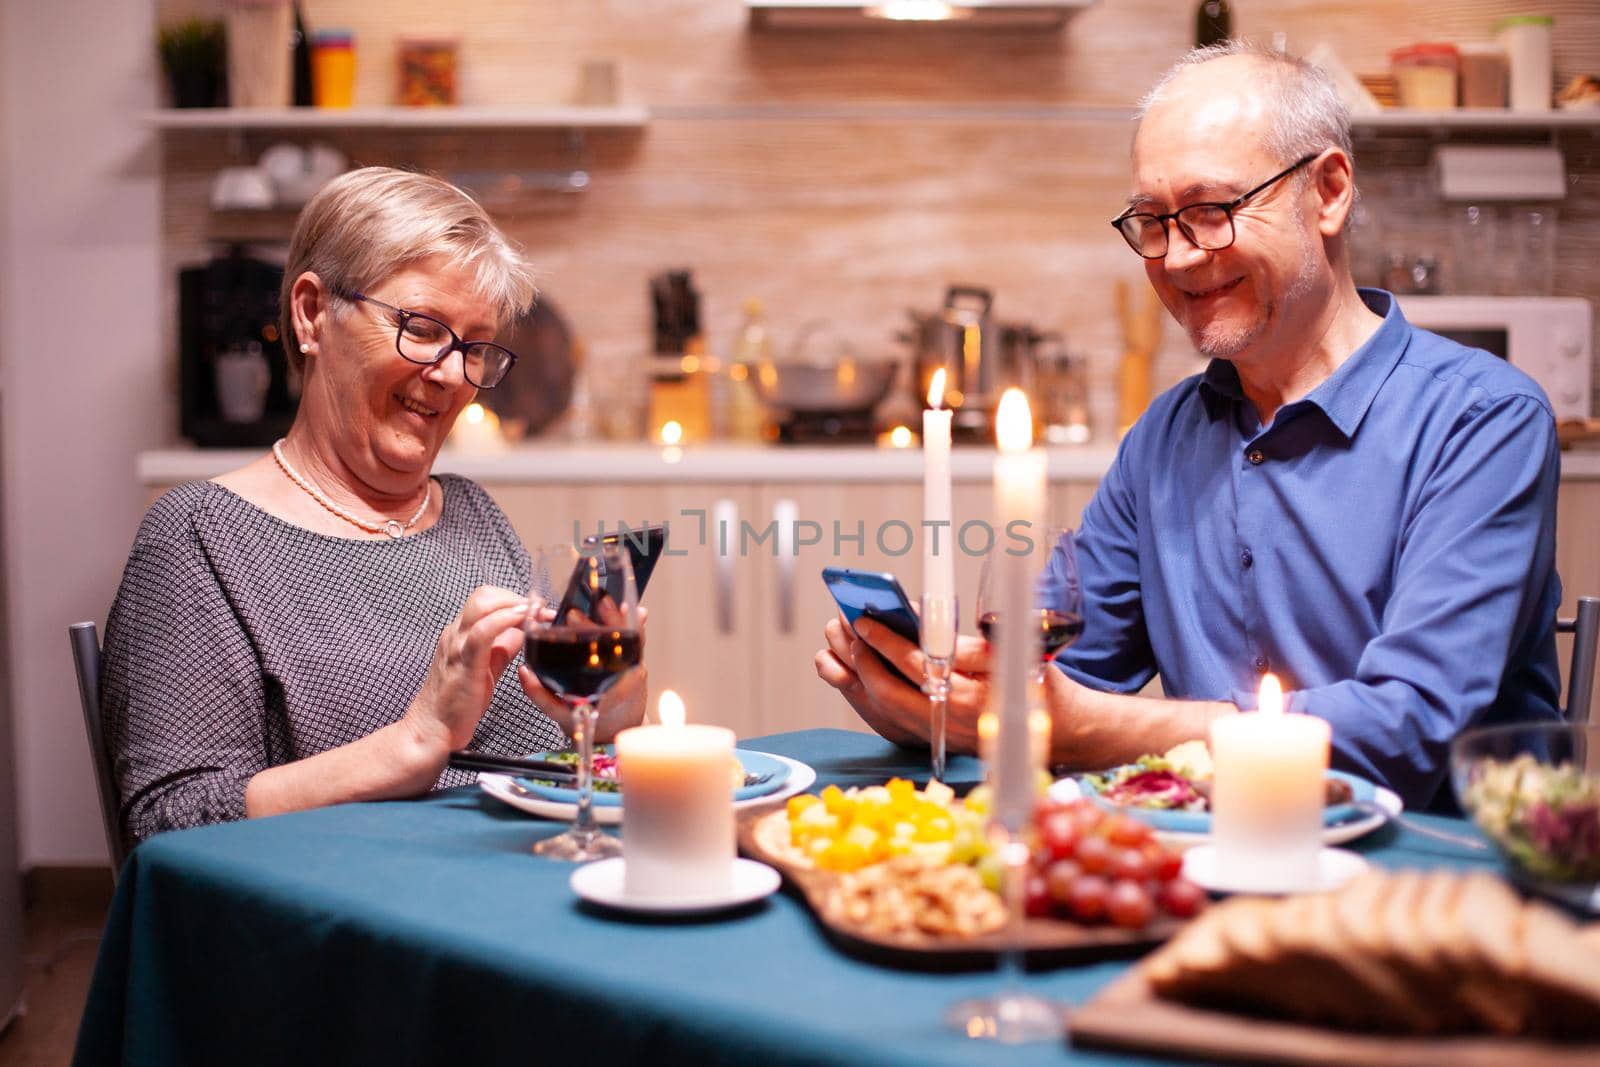 Retired man browsing on smartphone in kitchen and having dinner with wife. Sitting at the table in the kitchen, browsing, searching, using phone, internet, celebrating their anniversary in the dining room.